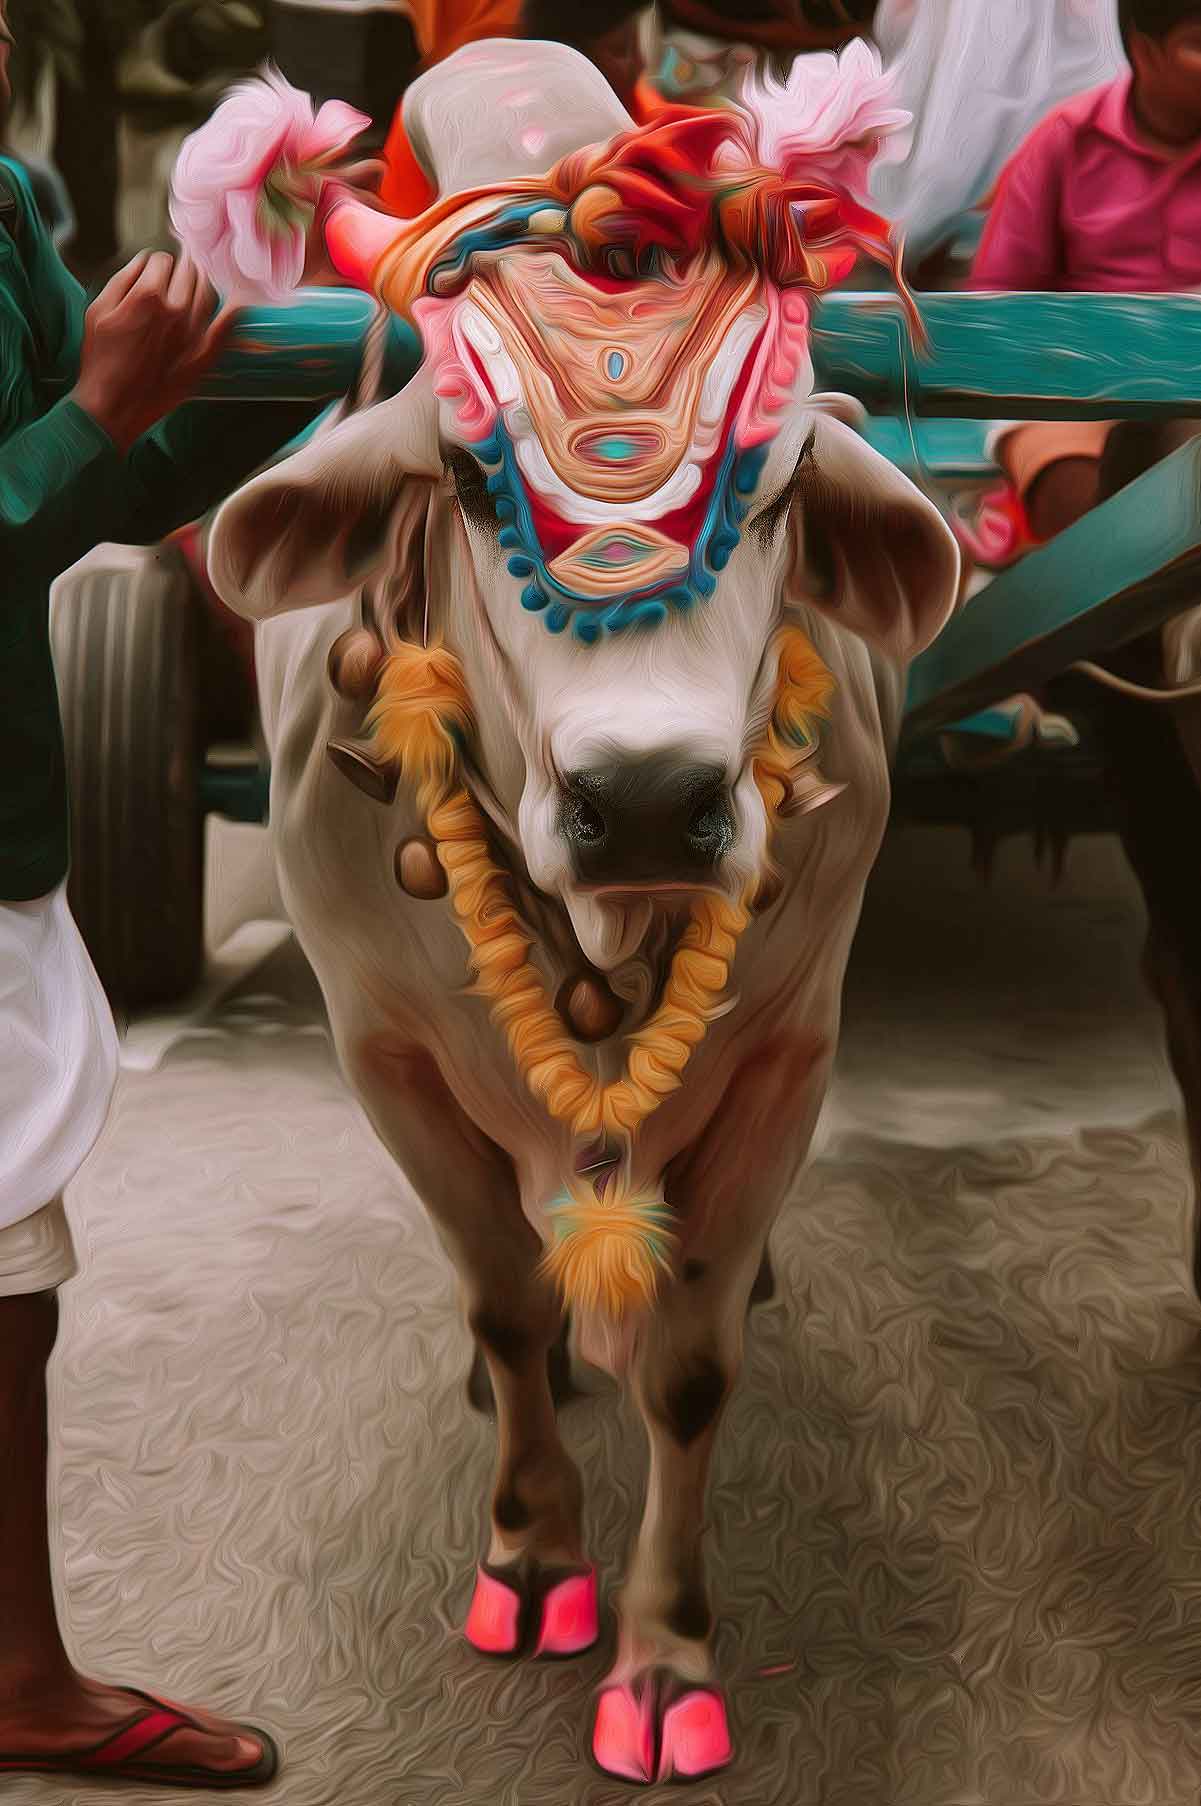 Rajasthan Govt: New regulations require owner to have at least 100 square yards of additional space to keep cow or a buffalo